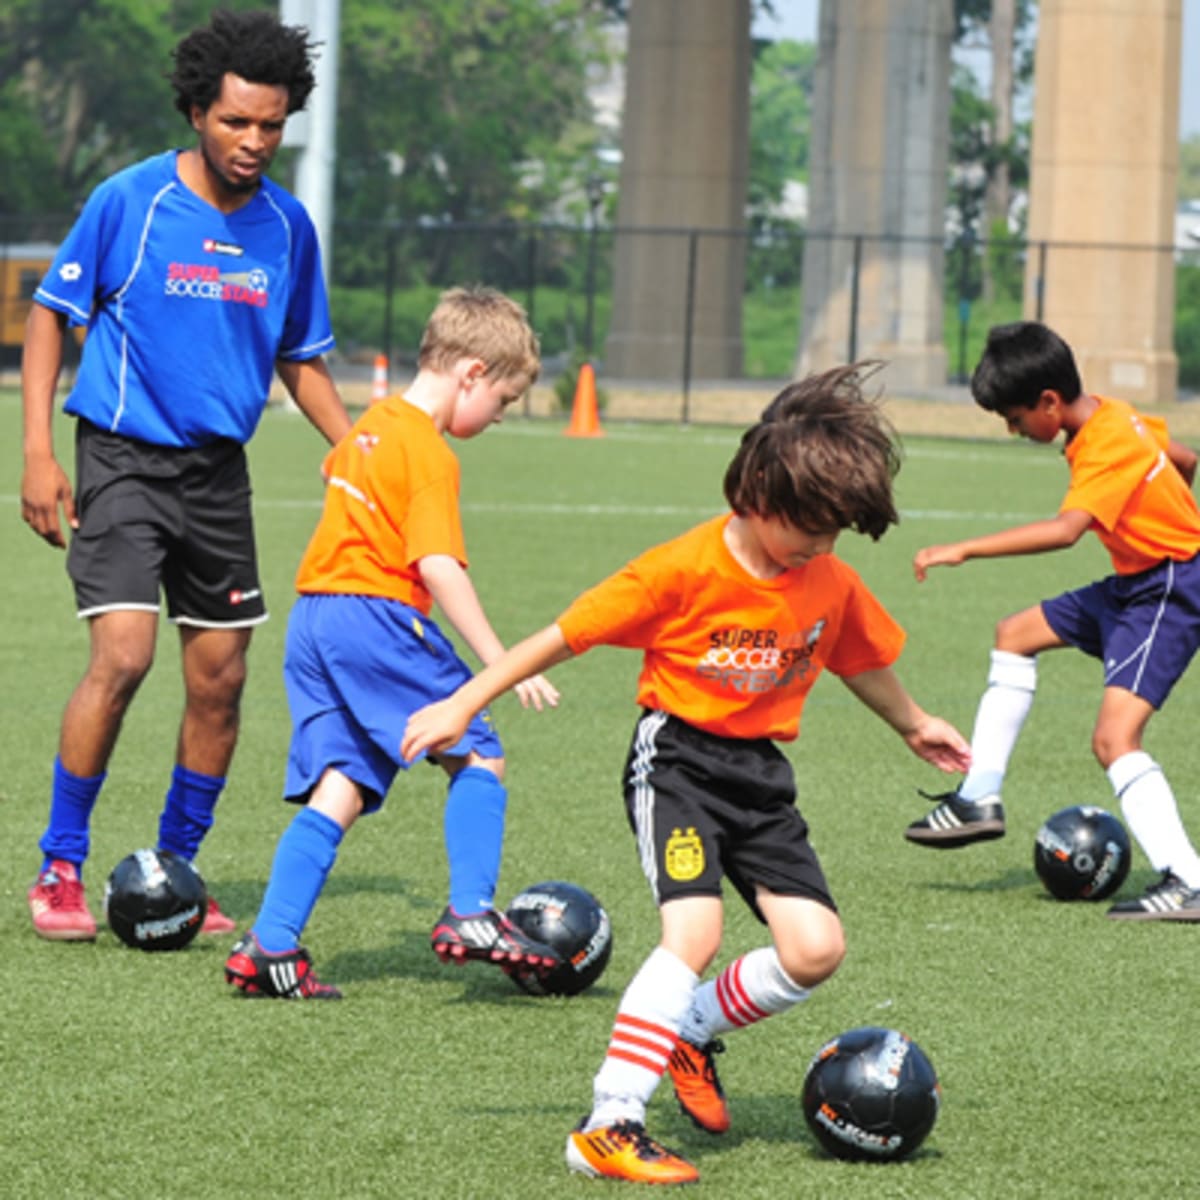 Providing all children with the ultimate football experience - SoccerstarsUK